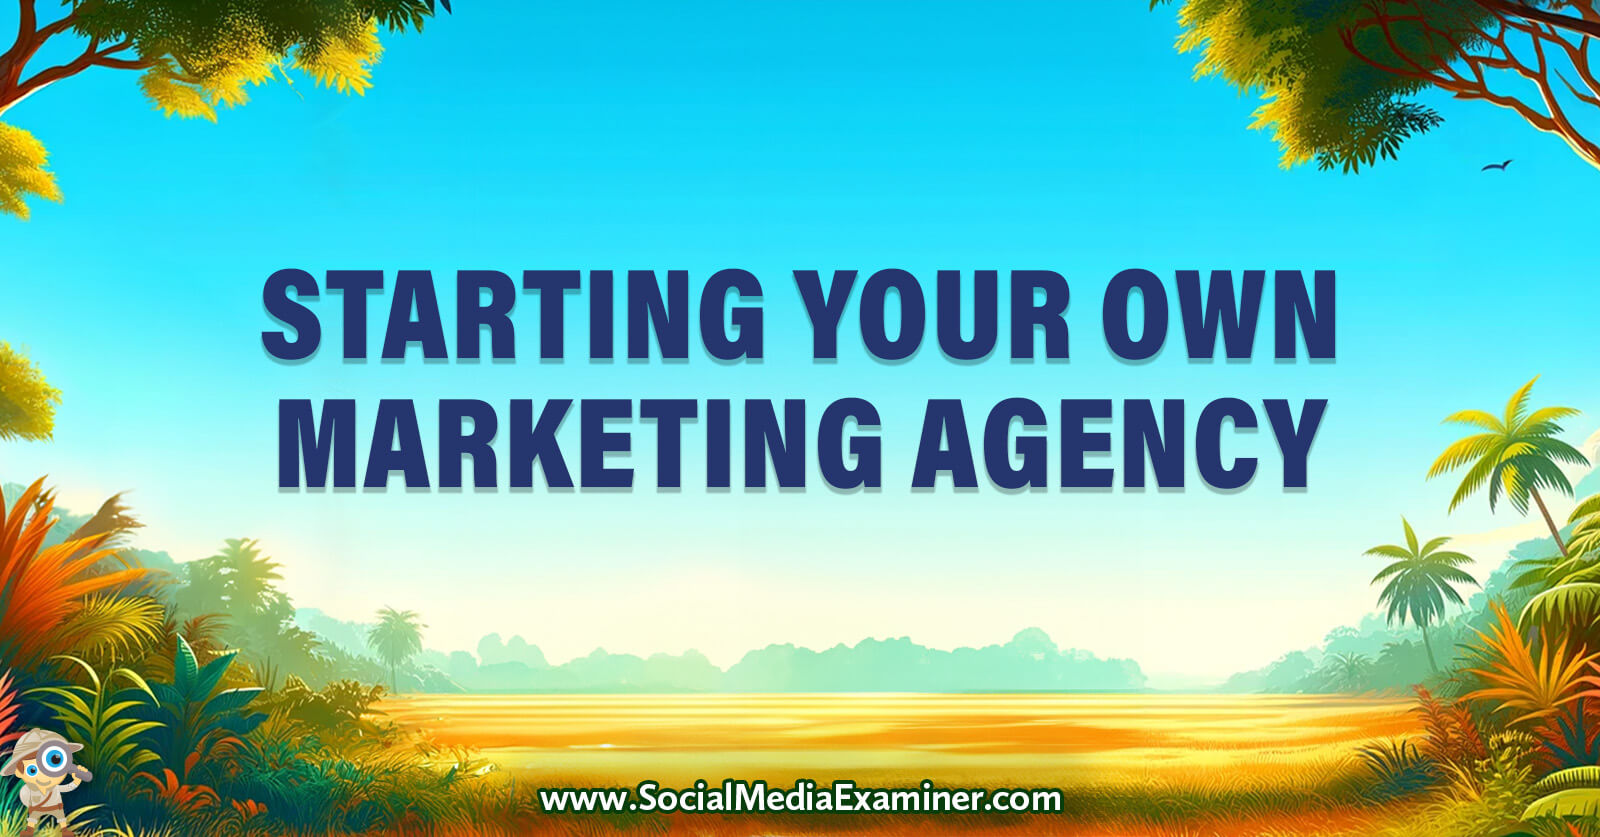 Starting Your Own Marketing Agency by Social Media Examiner